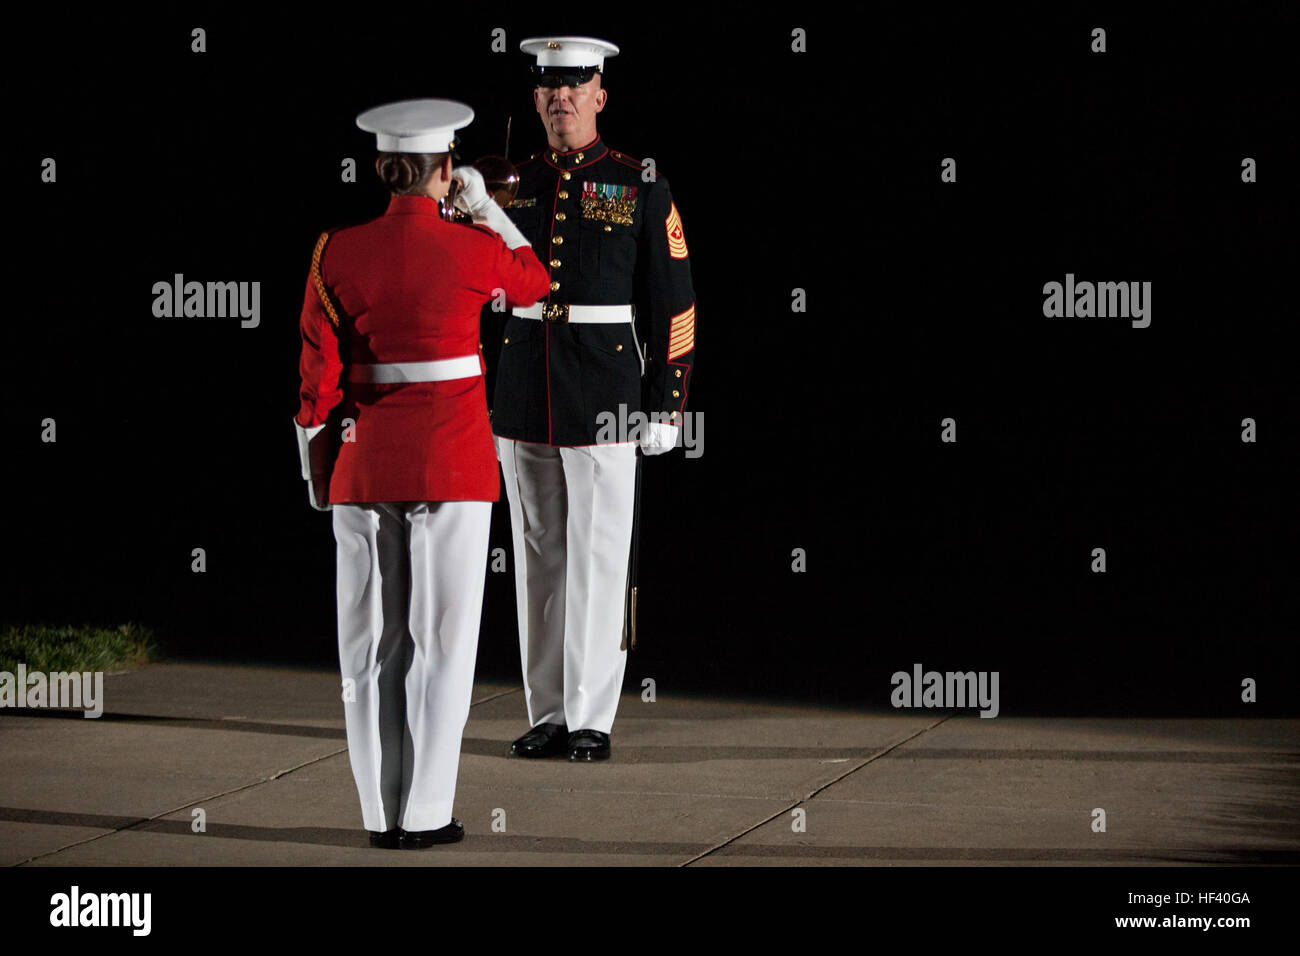 U.S. Marine Corps Staff Sgt. Codie Williams, left, ceremonial bugler, Marine Barracks Washington (MBW), performs with Sgt. Maj. Joseph Gray, command sergeant major of MBW, during an evening parade at MBW, Washington, D.C., May 20, 2016. The evening parade summer tradition began in 1934 and features the Silent Drill Platoon, the U.S. Marine Band, the U.S. Marine Drum and Bugle Corps and two marching companies. More than 3,500 guests attend the parade every week. (U.S. Marine Corps photo by Lance Cpl. Hailey D. Stuart/Released) Marine Barracks Washington Evening Parade May 20, 2016 160520-M-LR22 Stock Photo